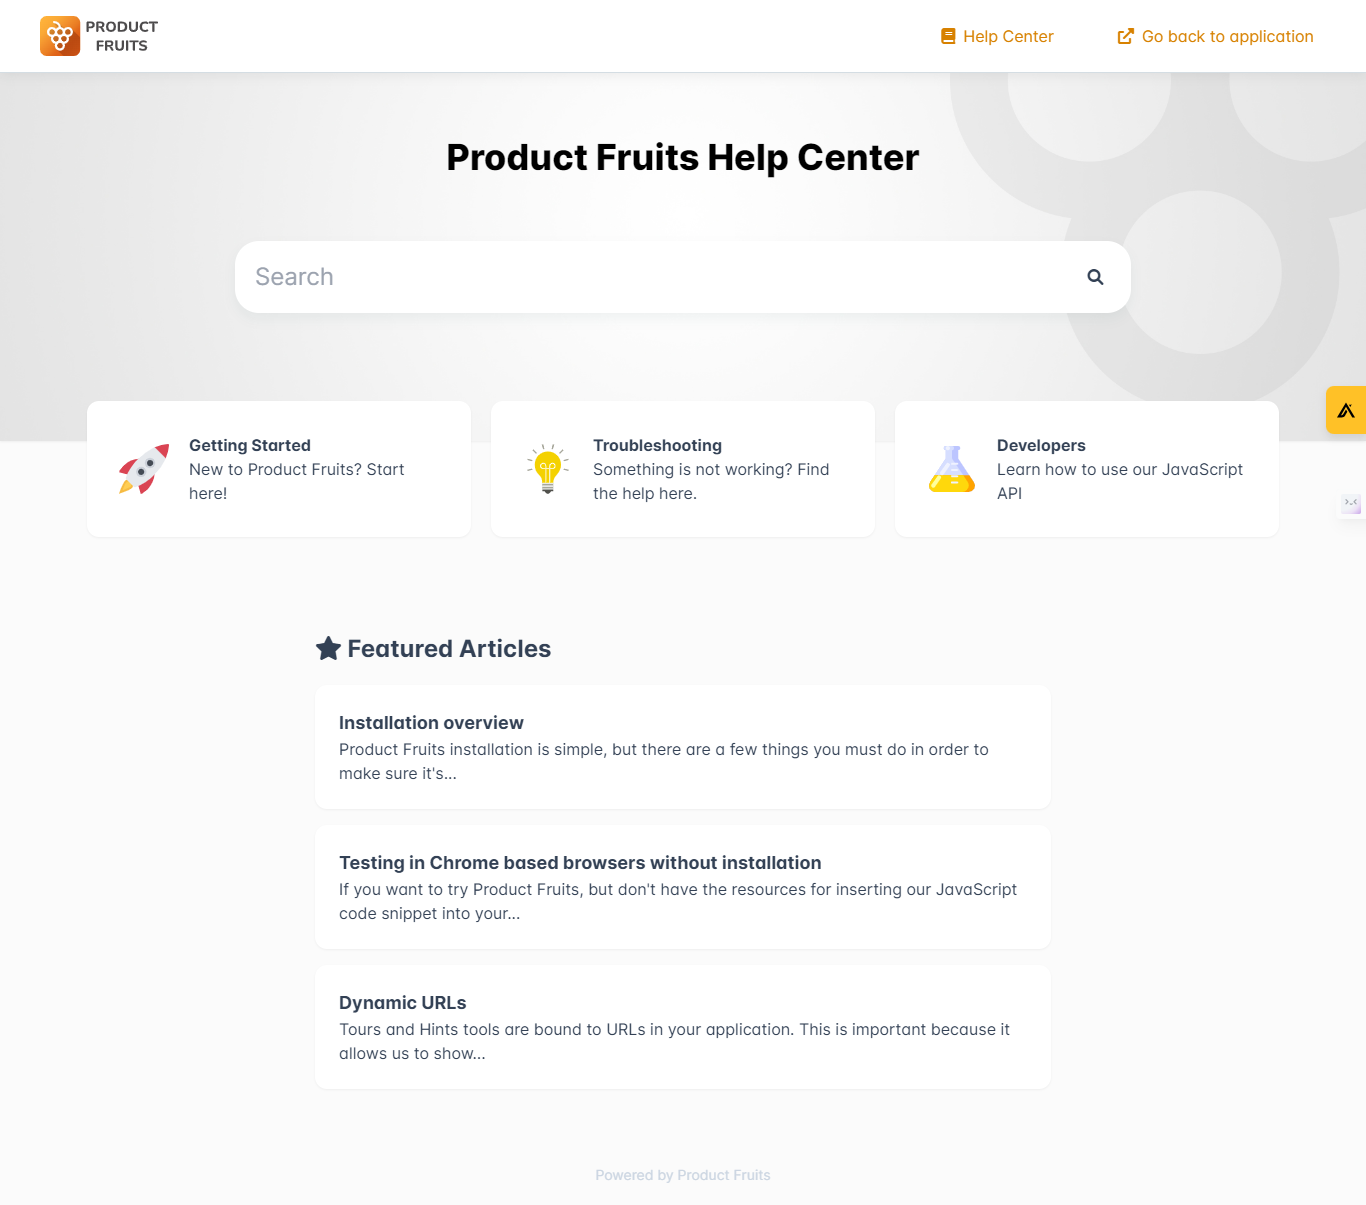 Product Fruits help center page